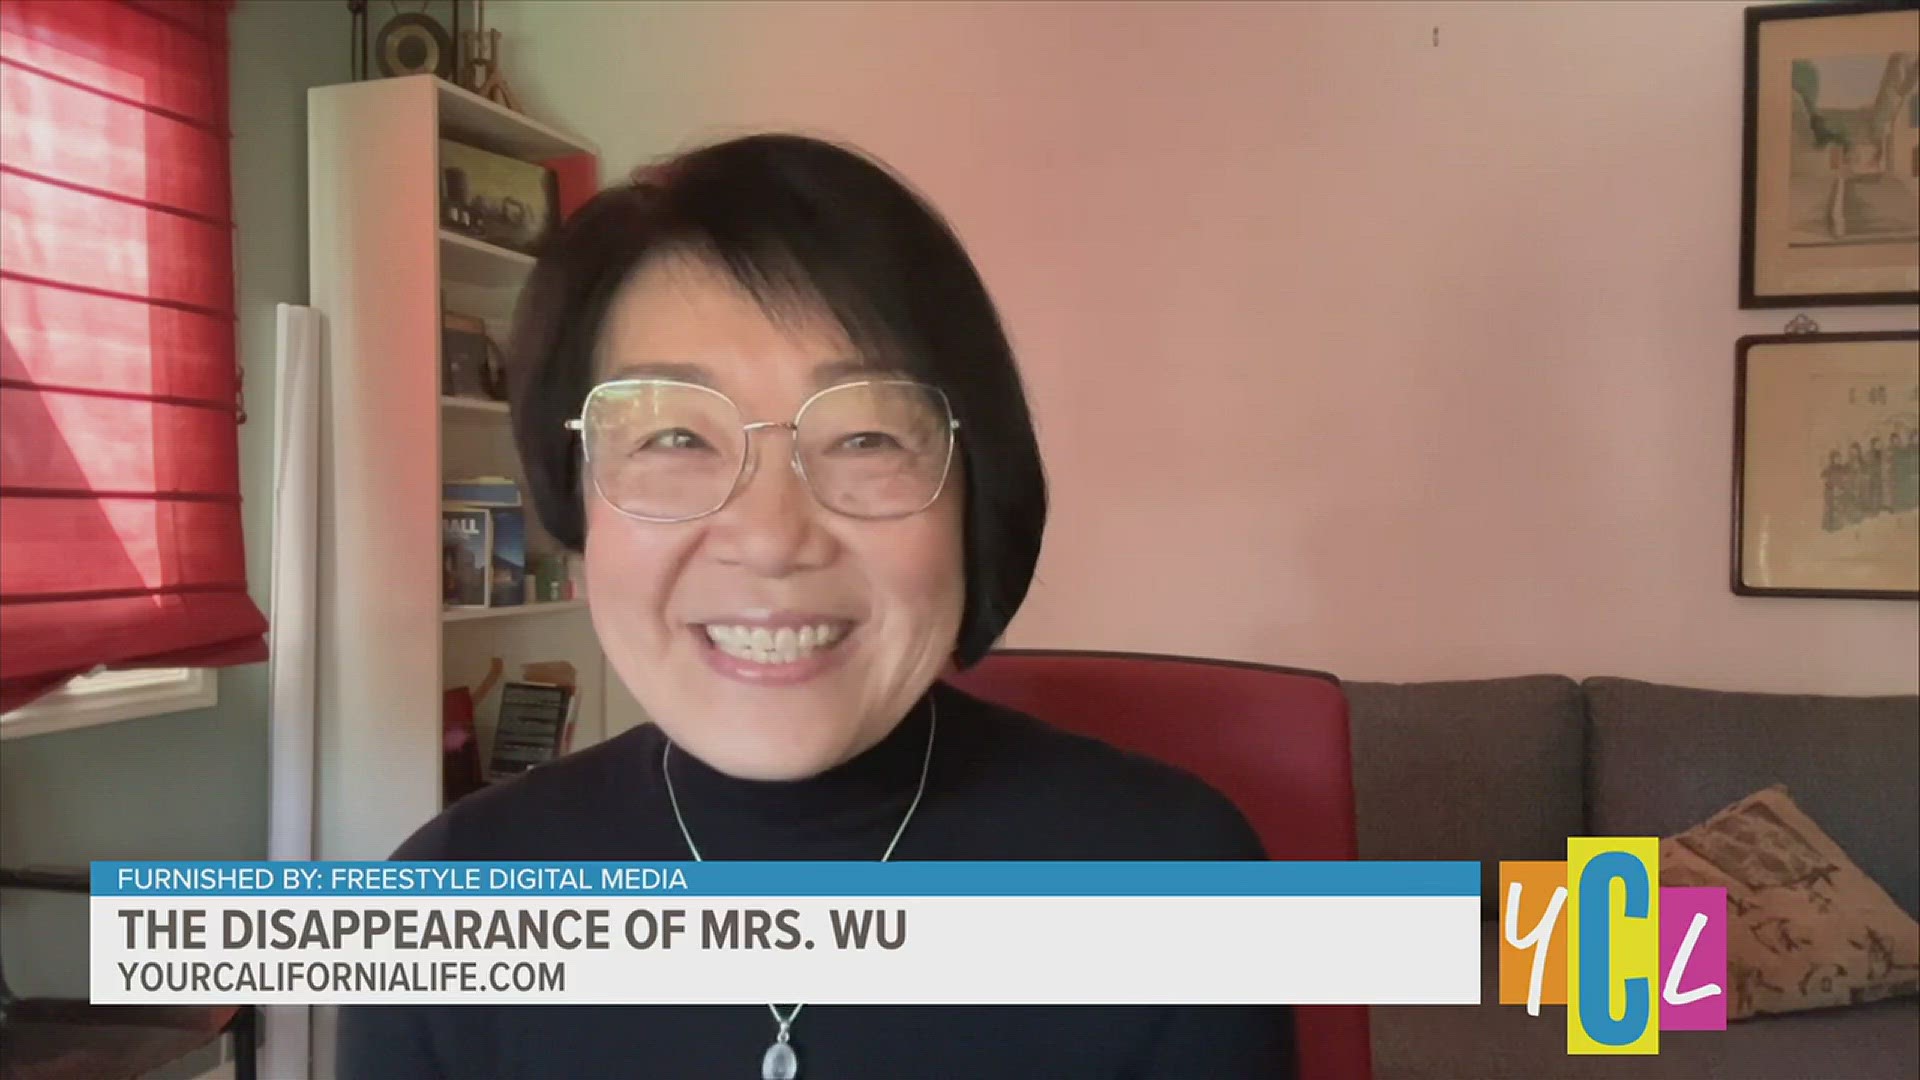 Award winning Anna Chi discusses her latest film, 'The Disappearance of Mrs. Wu' starring Actress Lisa Lu taking place along the California Coast.